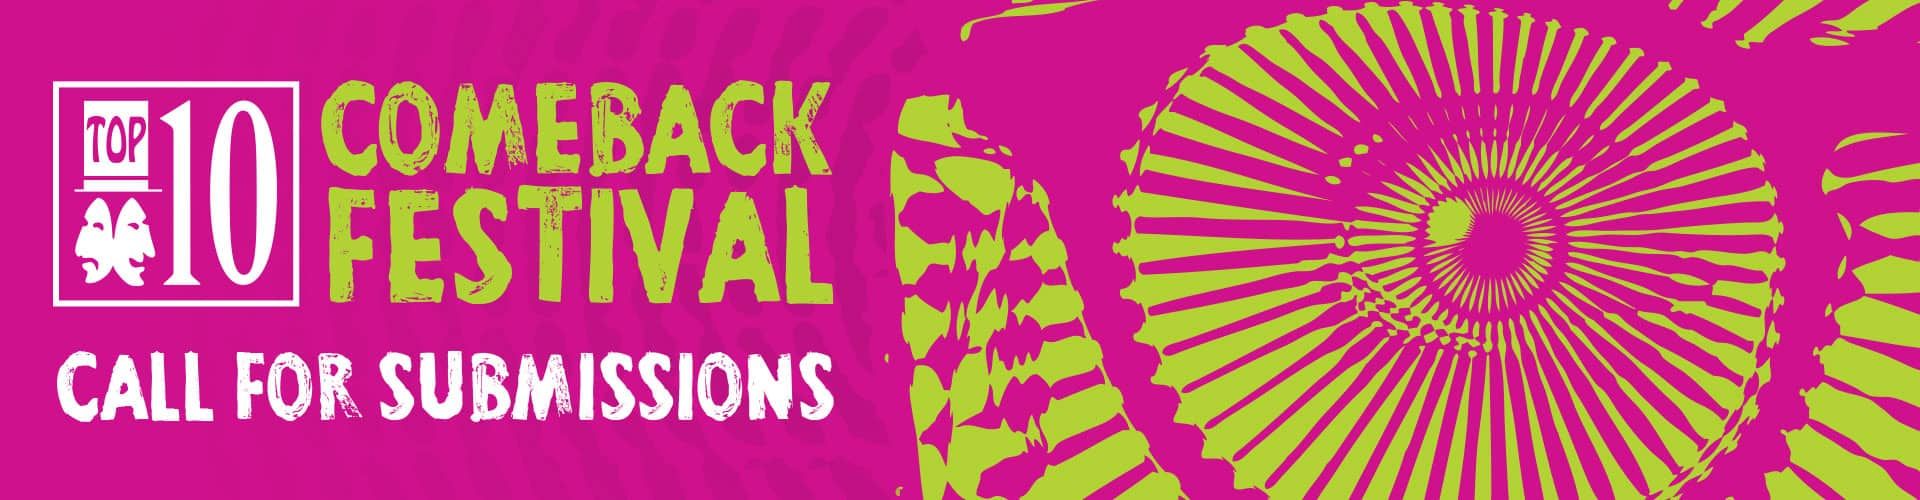 Comeback Festival Call For Submissions